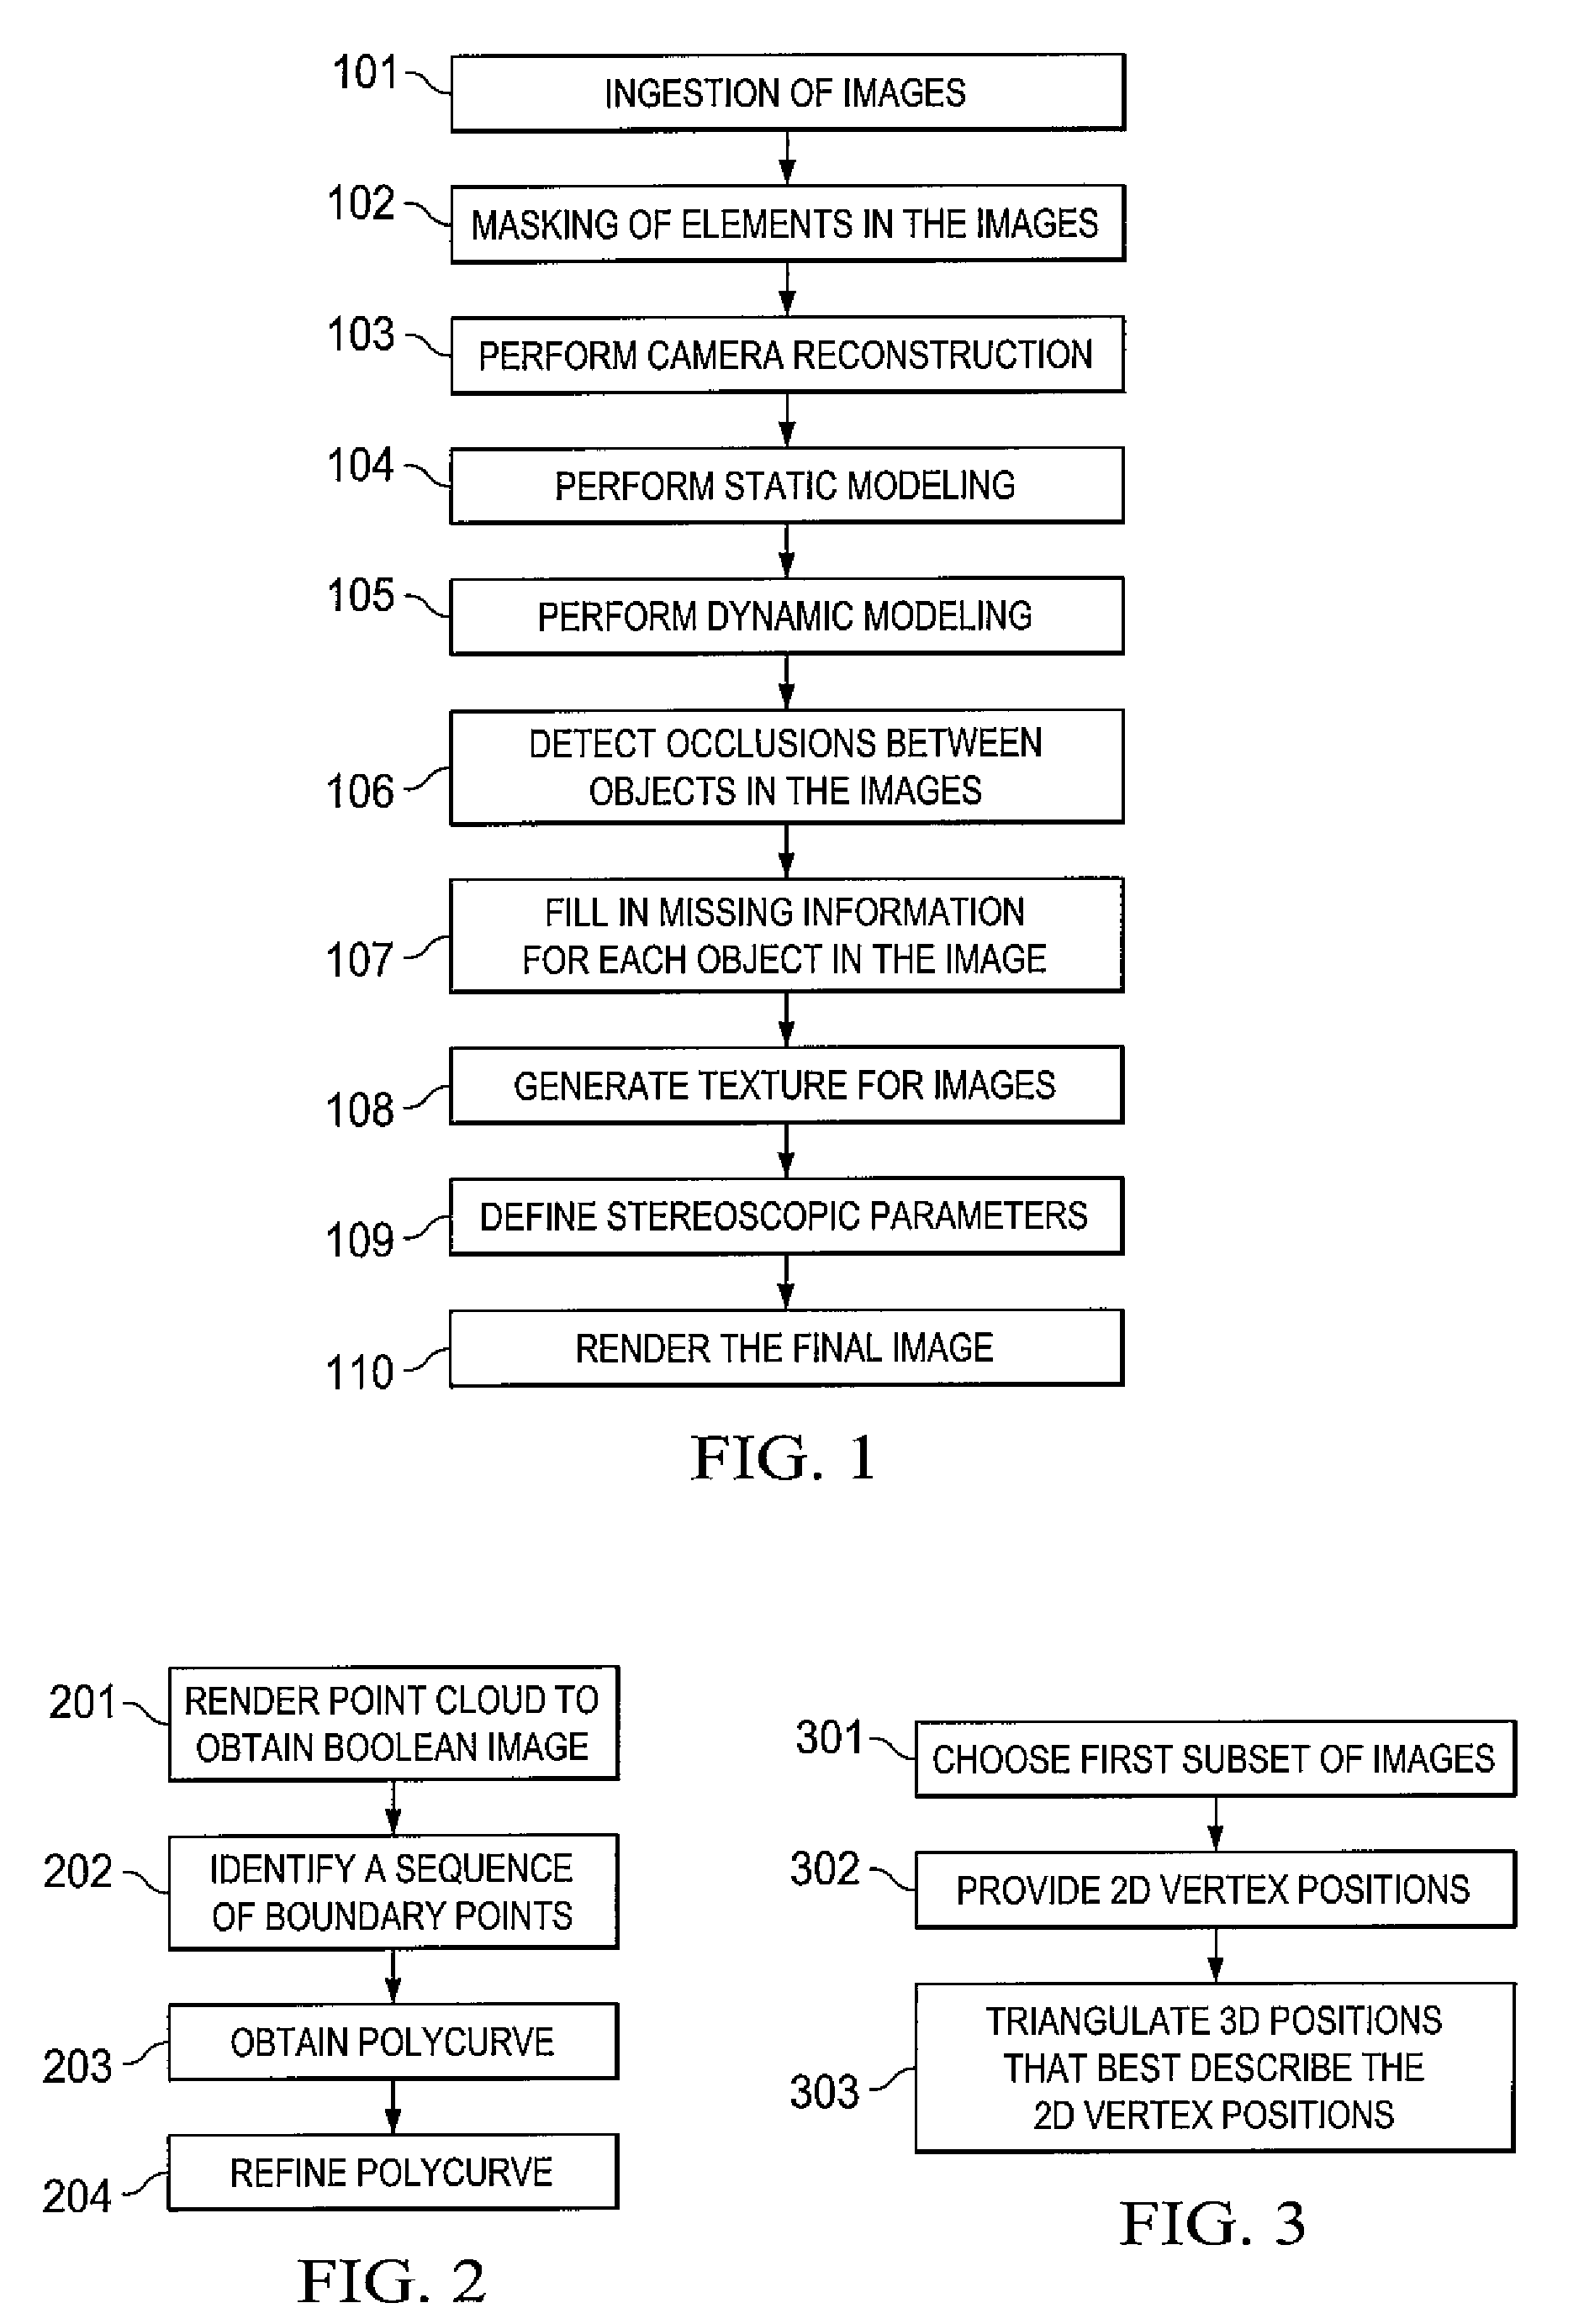 Systems and methods for 2-d to 3-d image conversion using mask to model, or model to mask, conversion